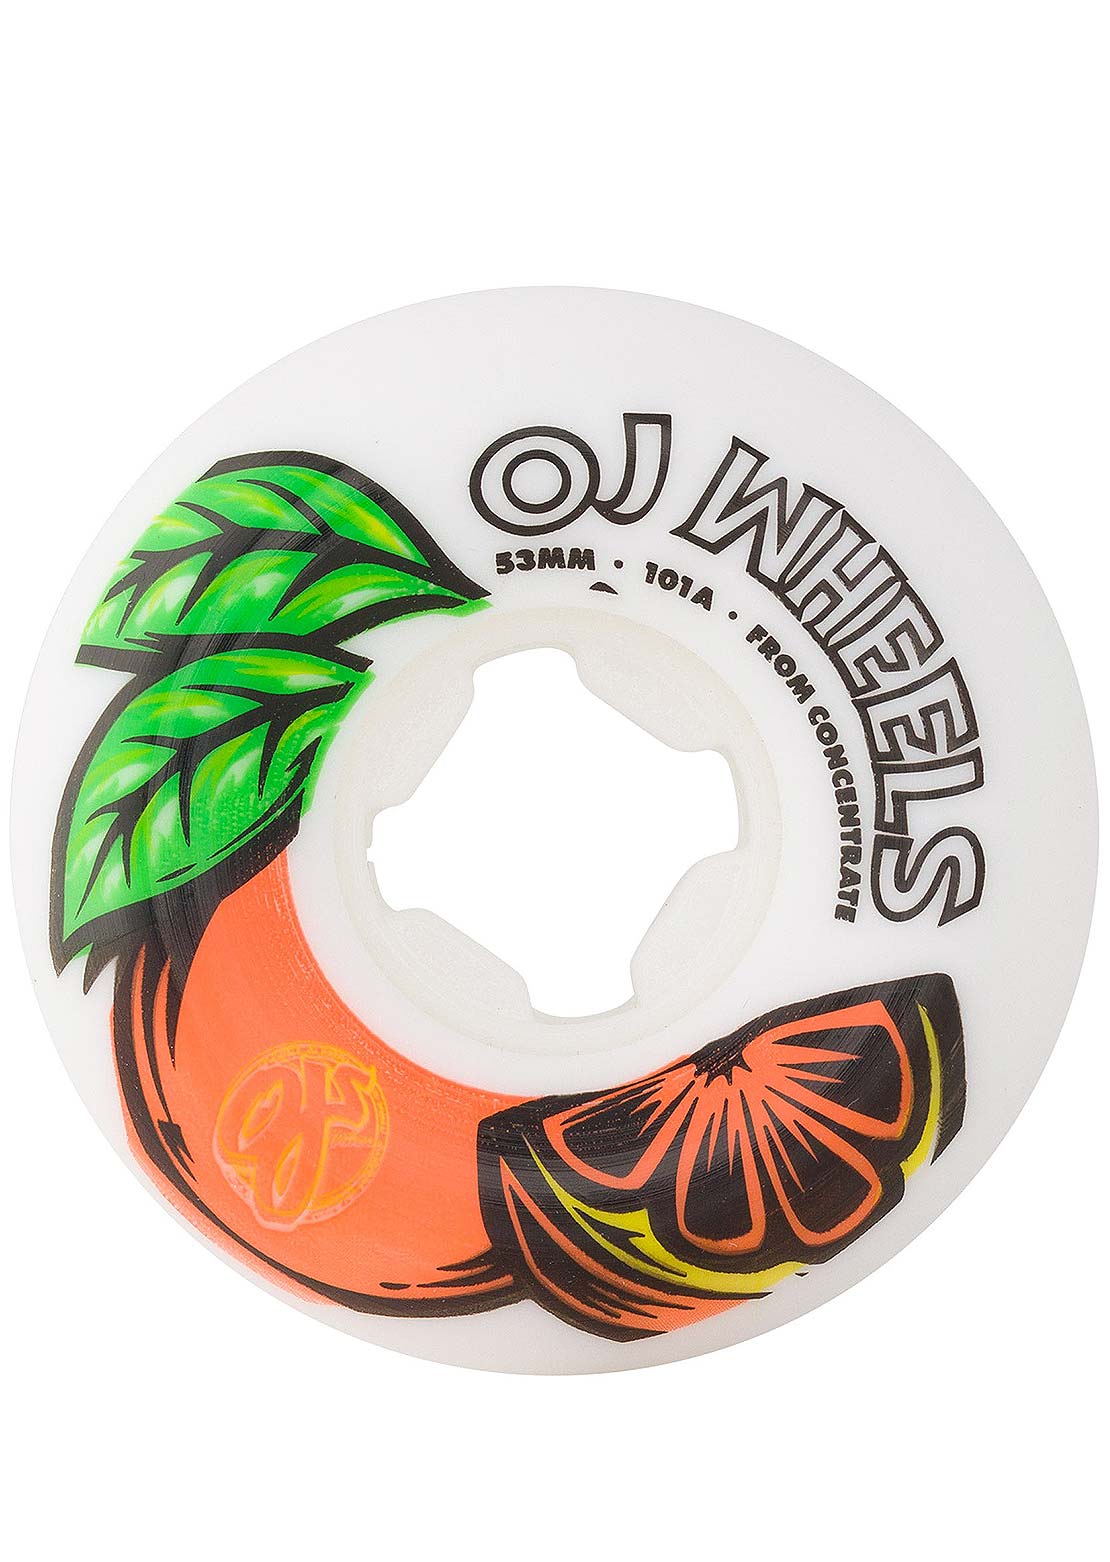 OJ Wheels From Concentrate 101A Skateboard Wheels 53 mm White